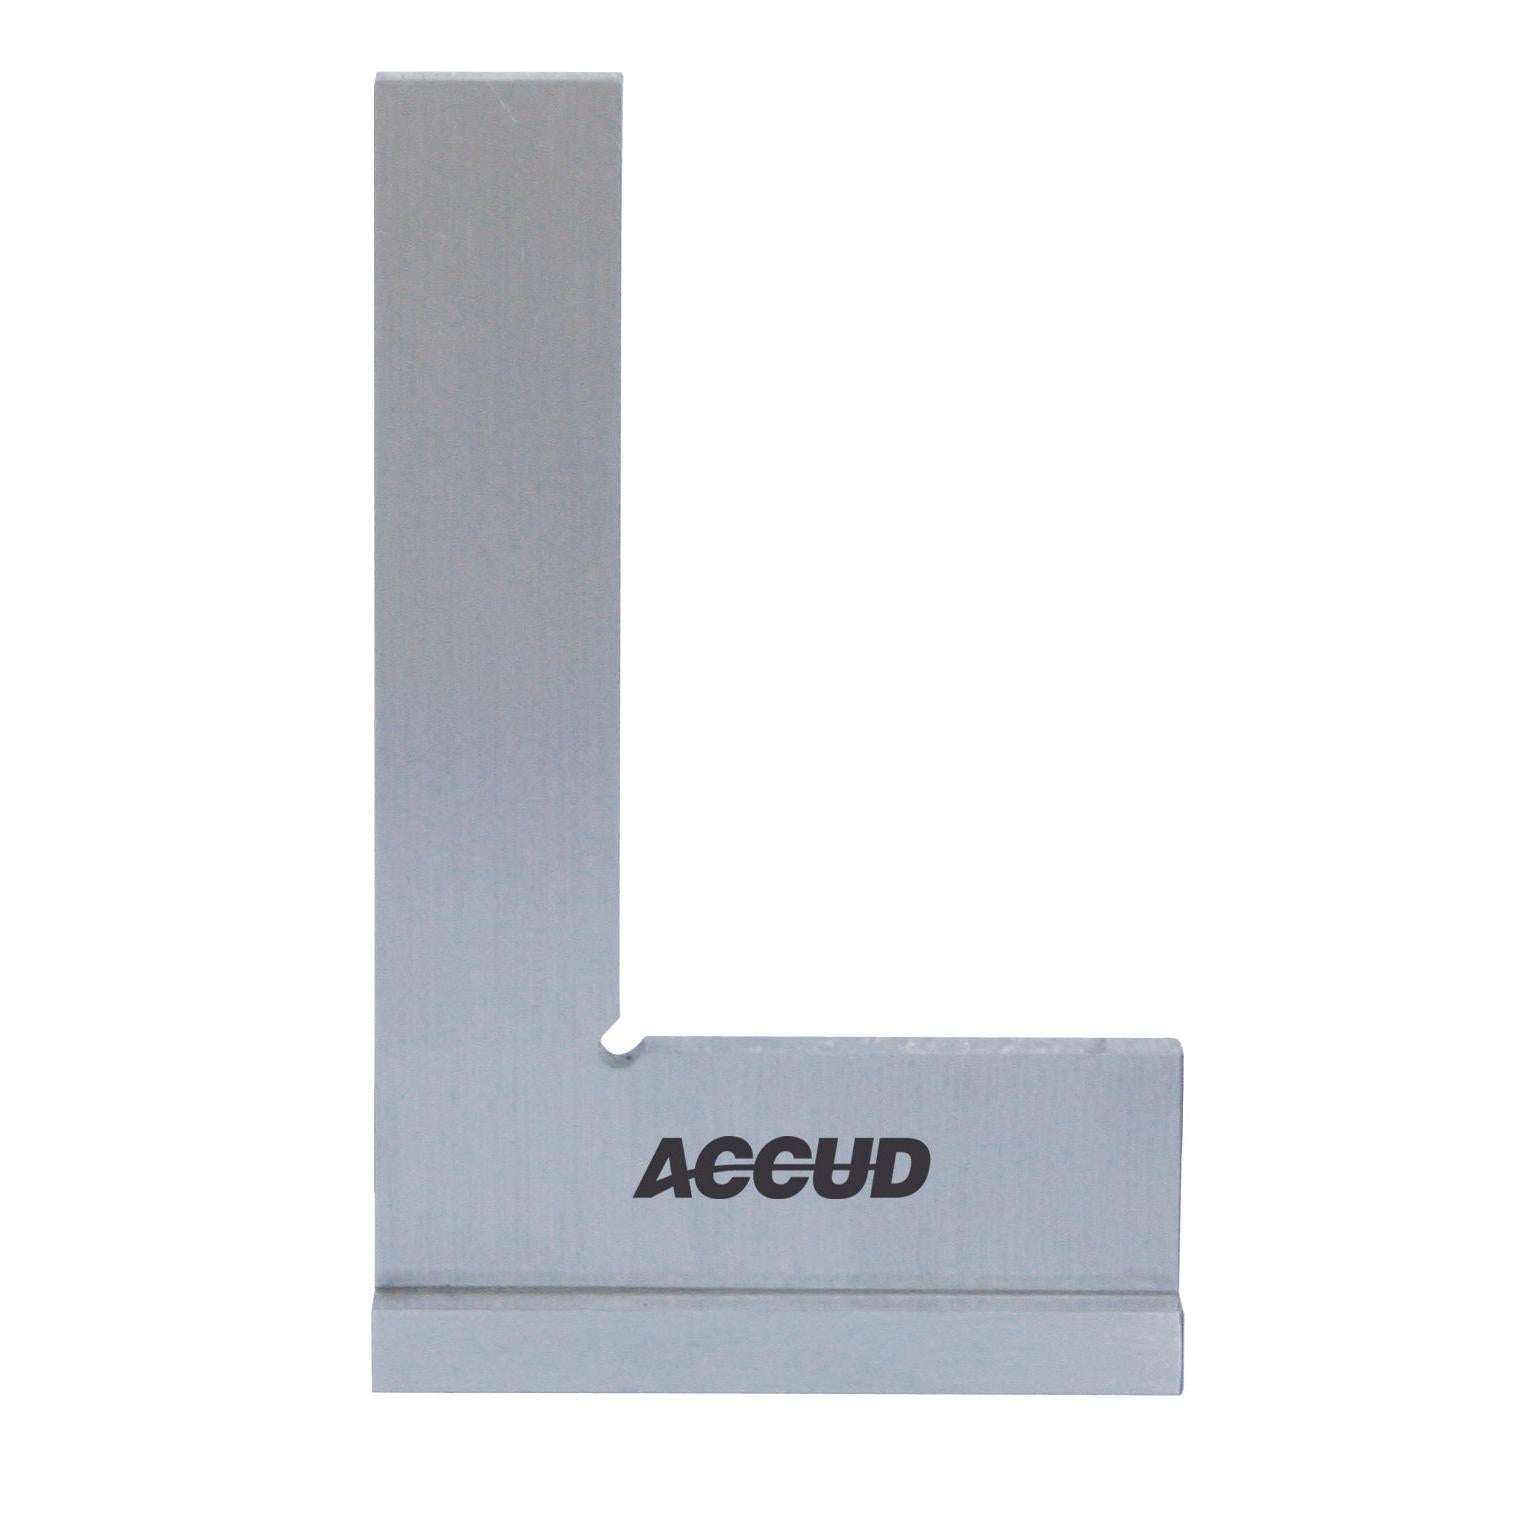 ACCUD | Flat Edge Square 50X40Mm | 842-002-10 Power Tool Services